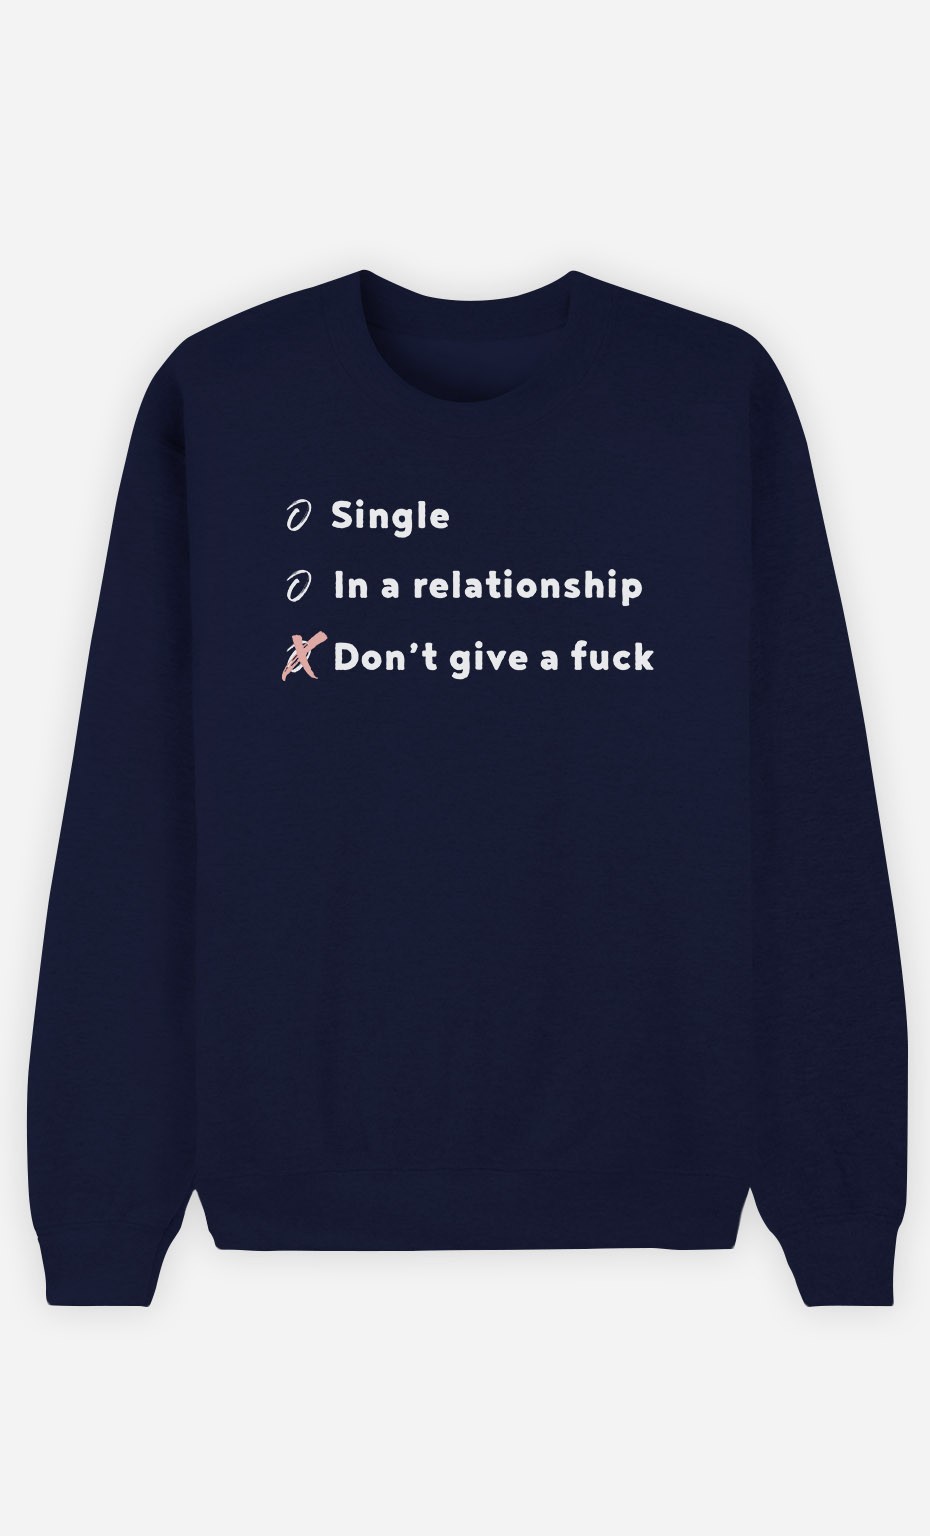 Sweatshirt Single, In A Relationship, Don't Give a Fuck